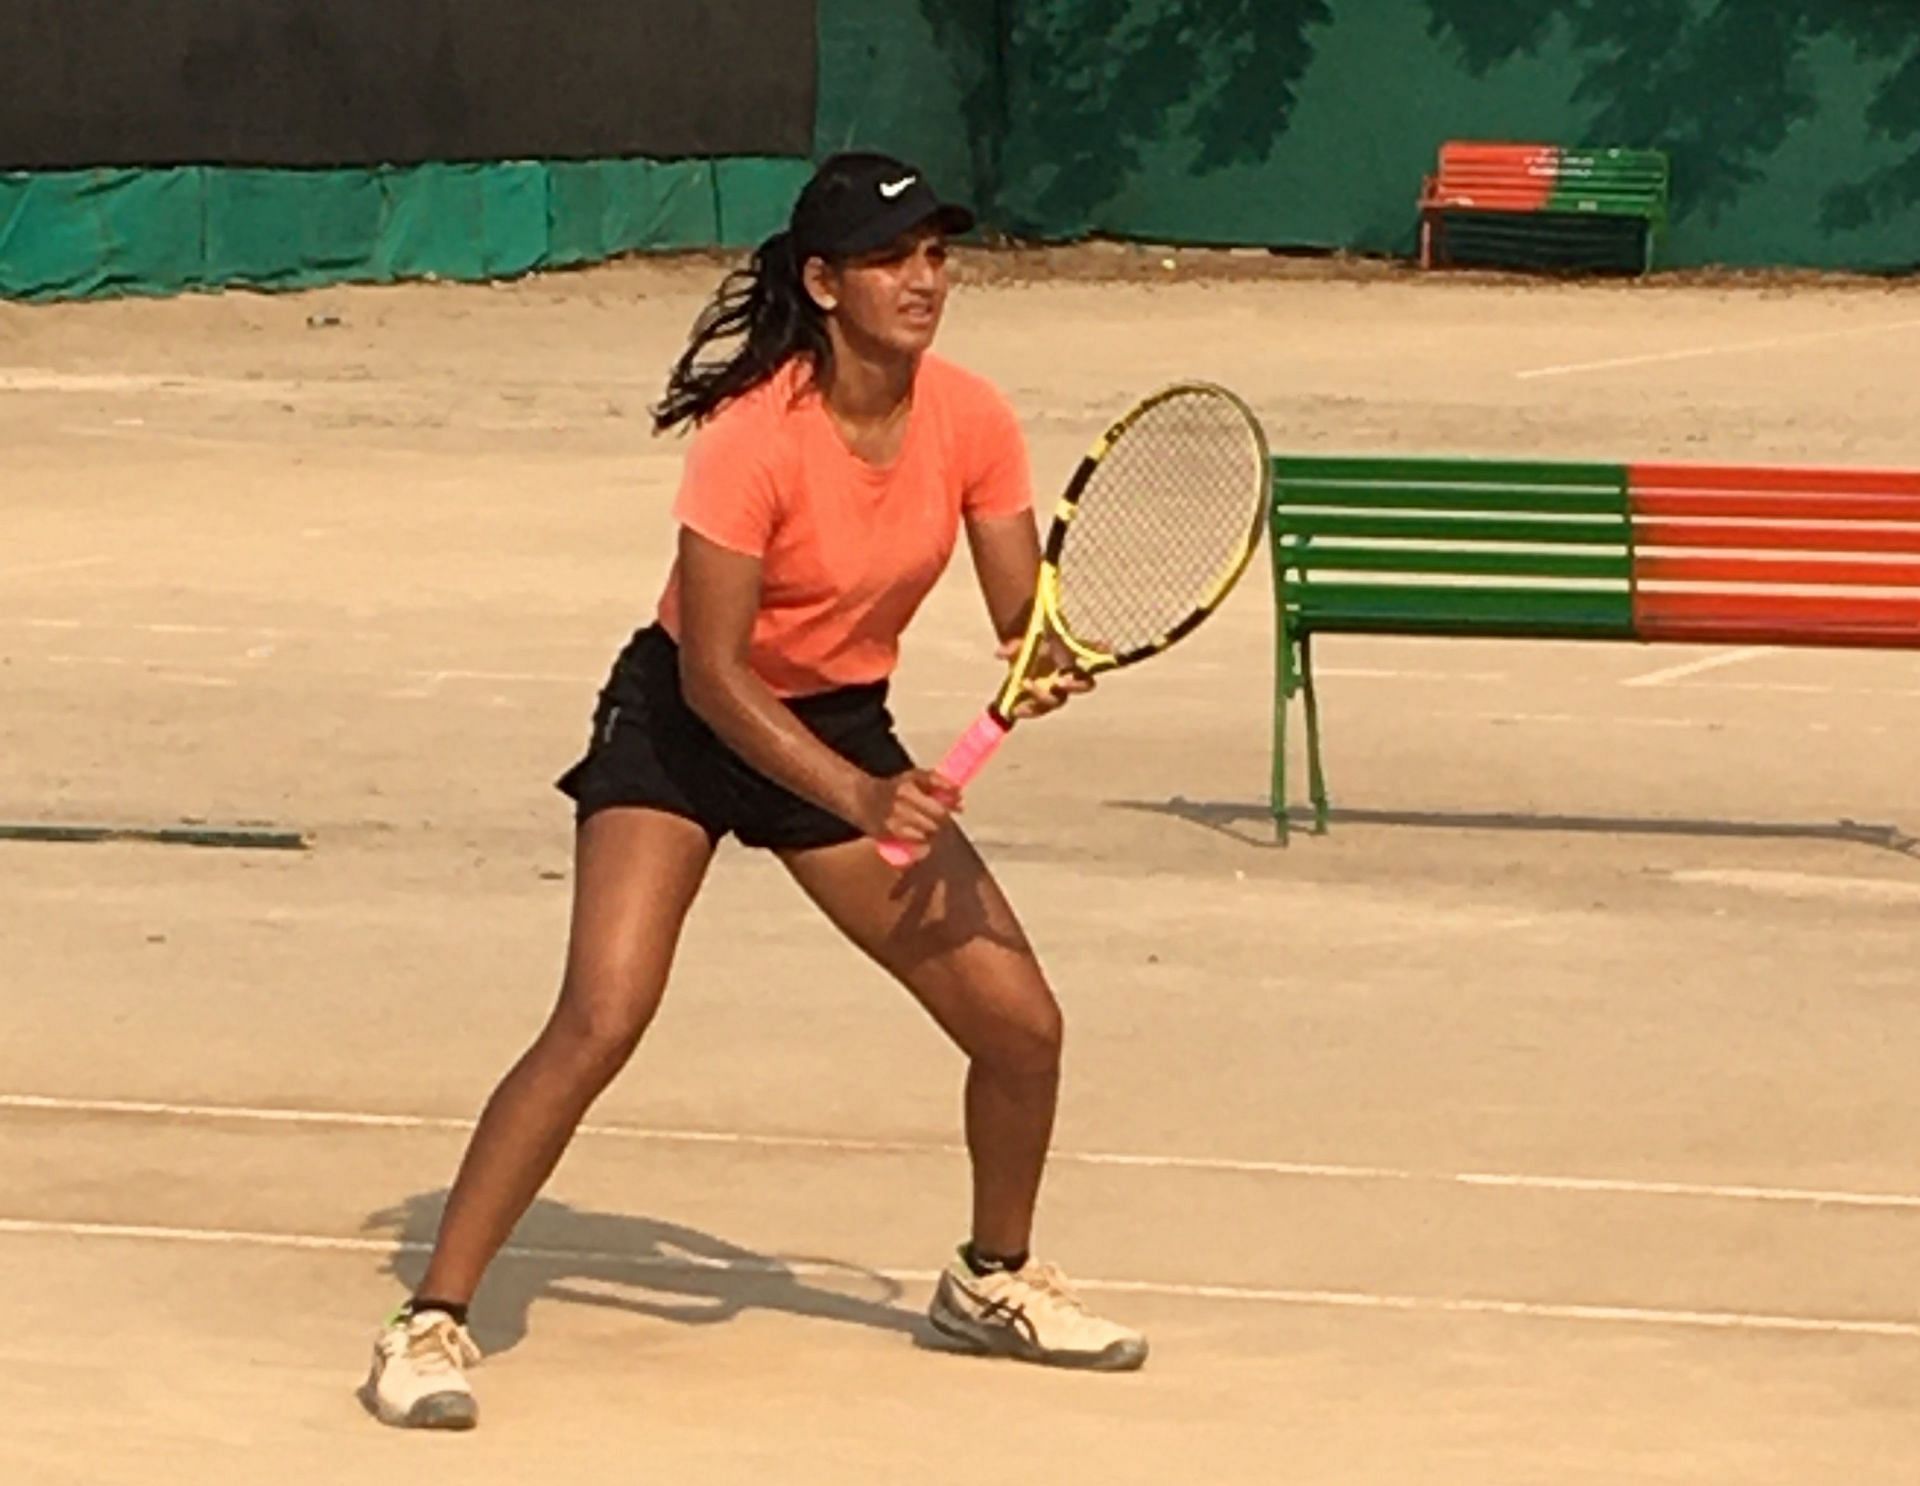 Unseeded Sahaja Yamalapalli of India upset second seed Anna Ureke of Russia in the semifinal on Saturday. (Pic credit: MSLTA)